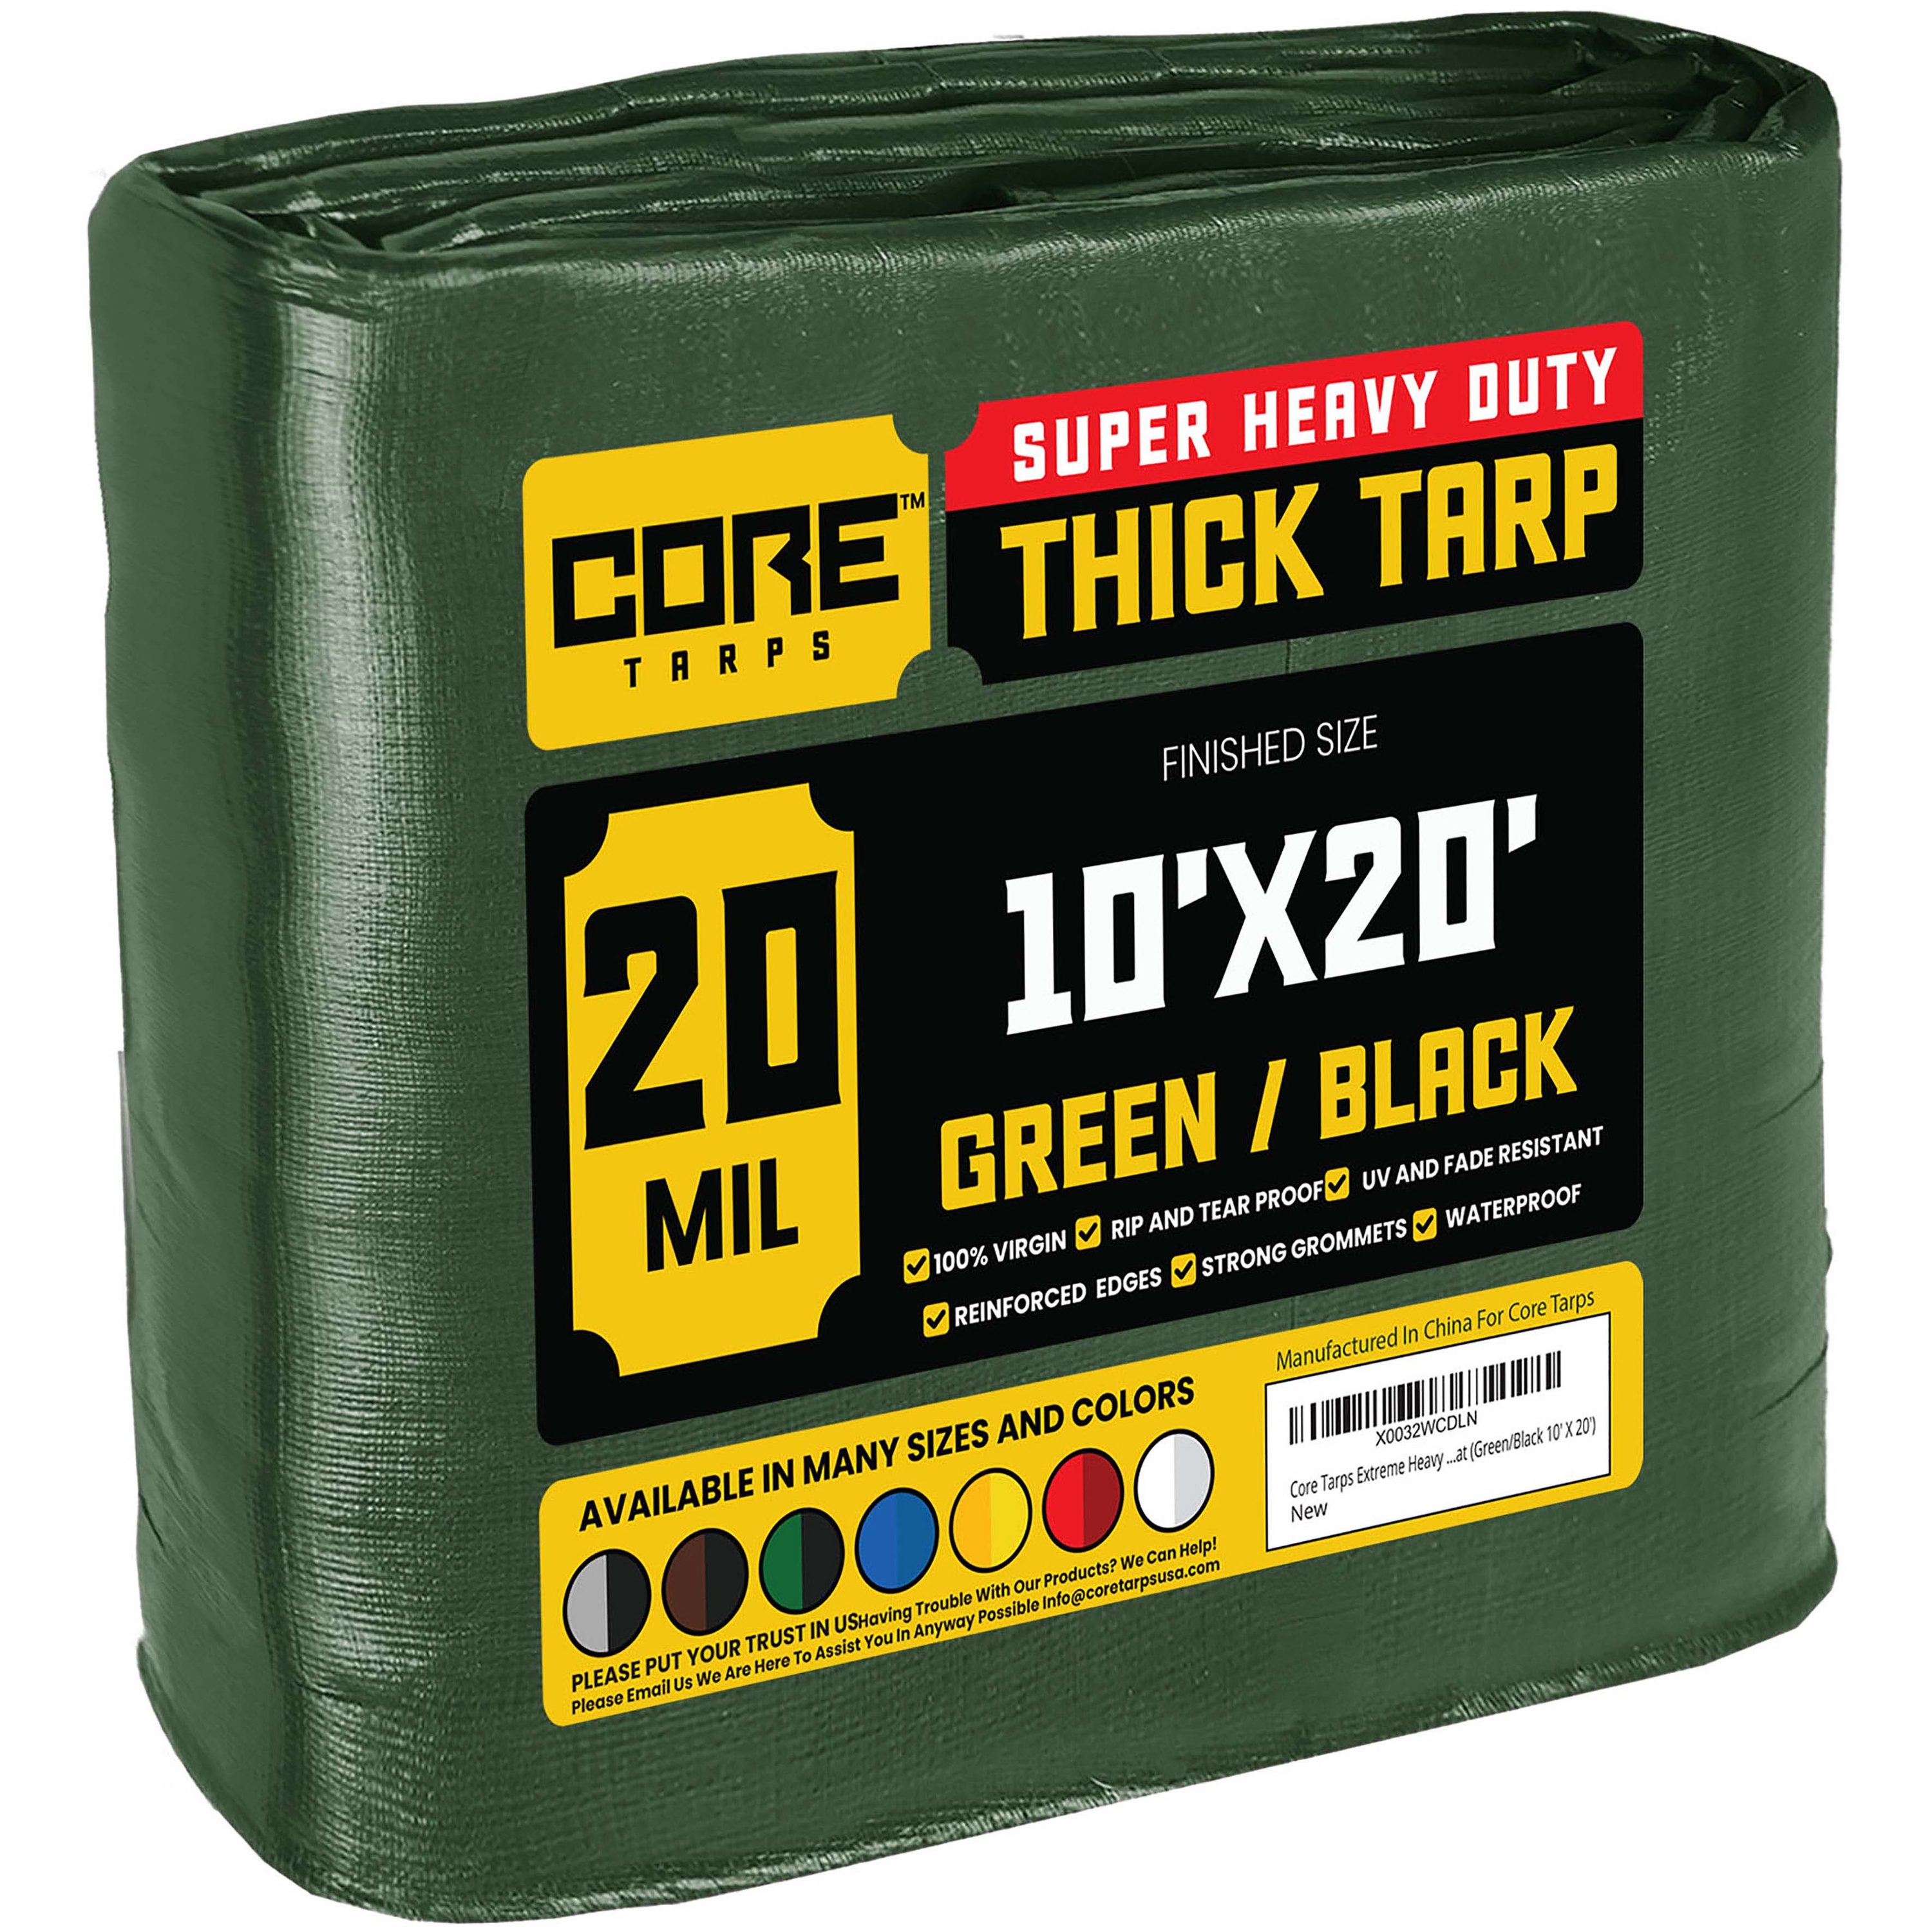 5$ OFF 2 OR MORE 10' x 20' GREEN MESH SCREEN SHADE HAULING TARP W/ GROMMETS, 